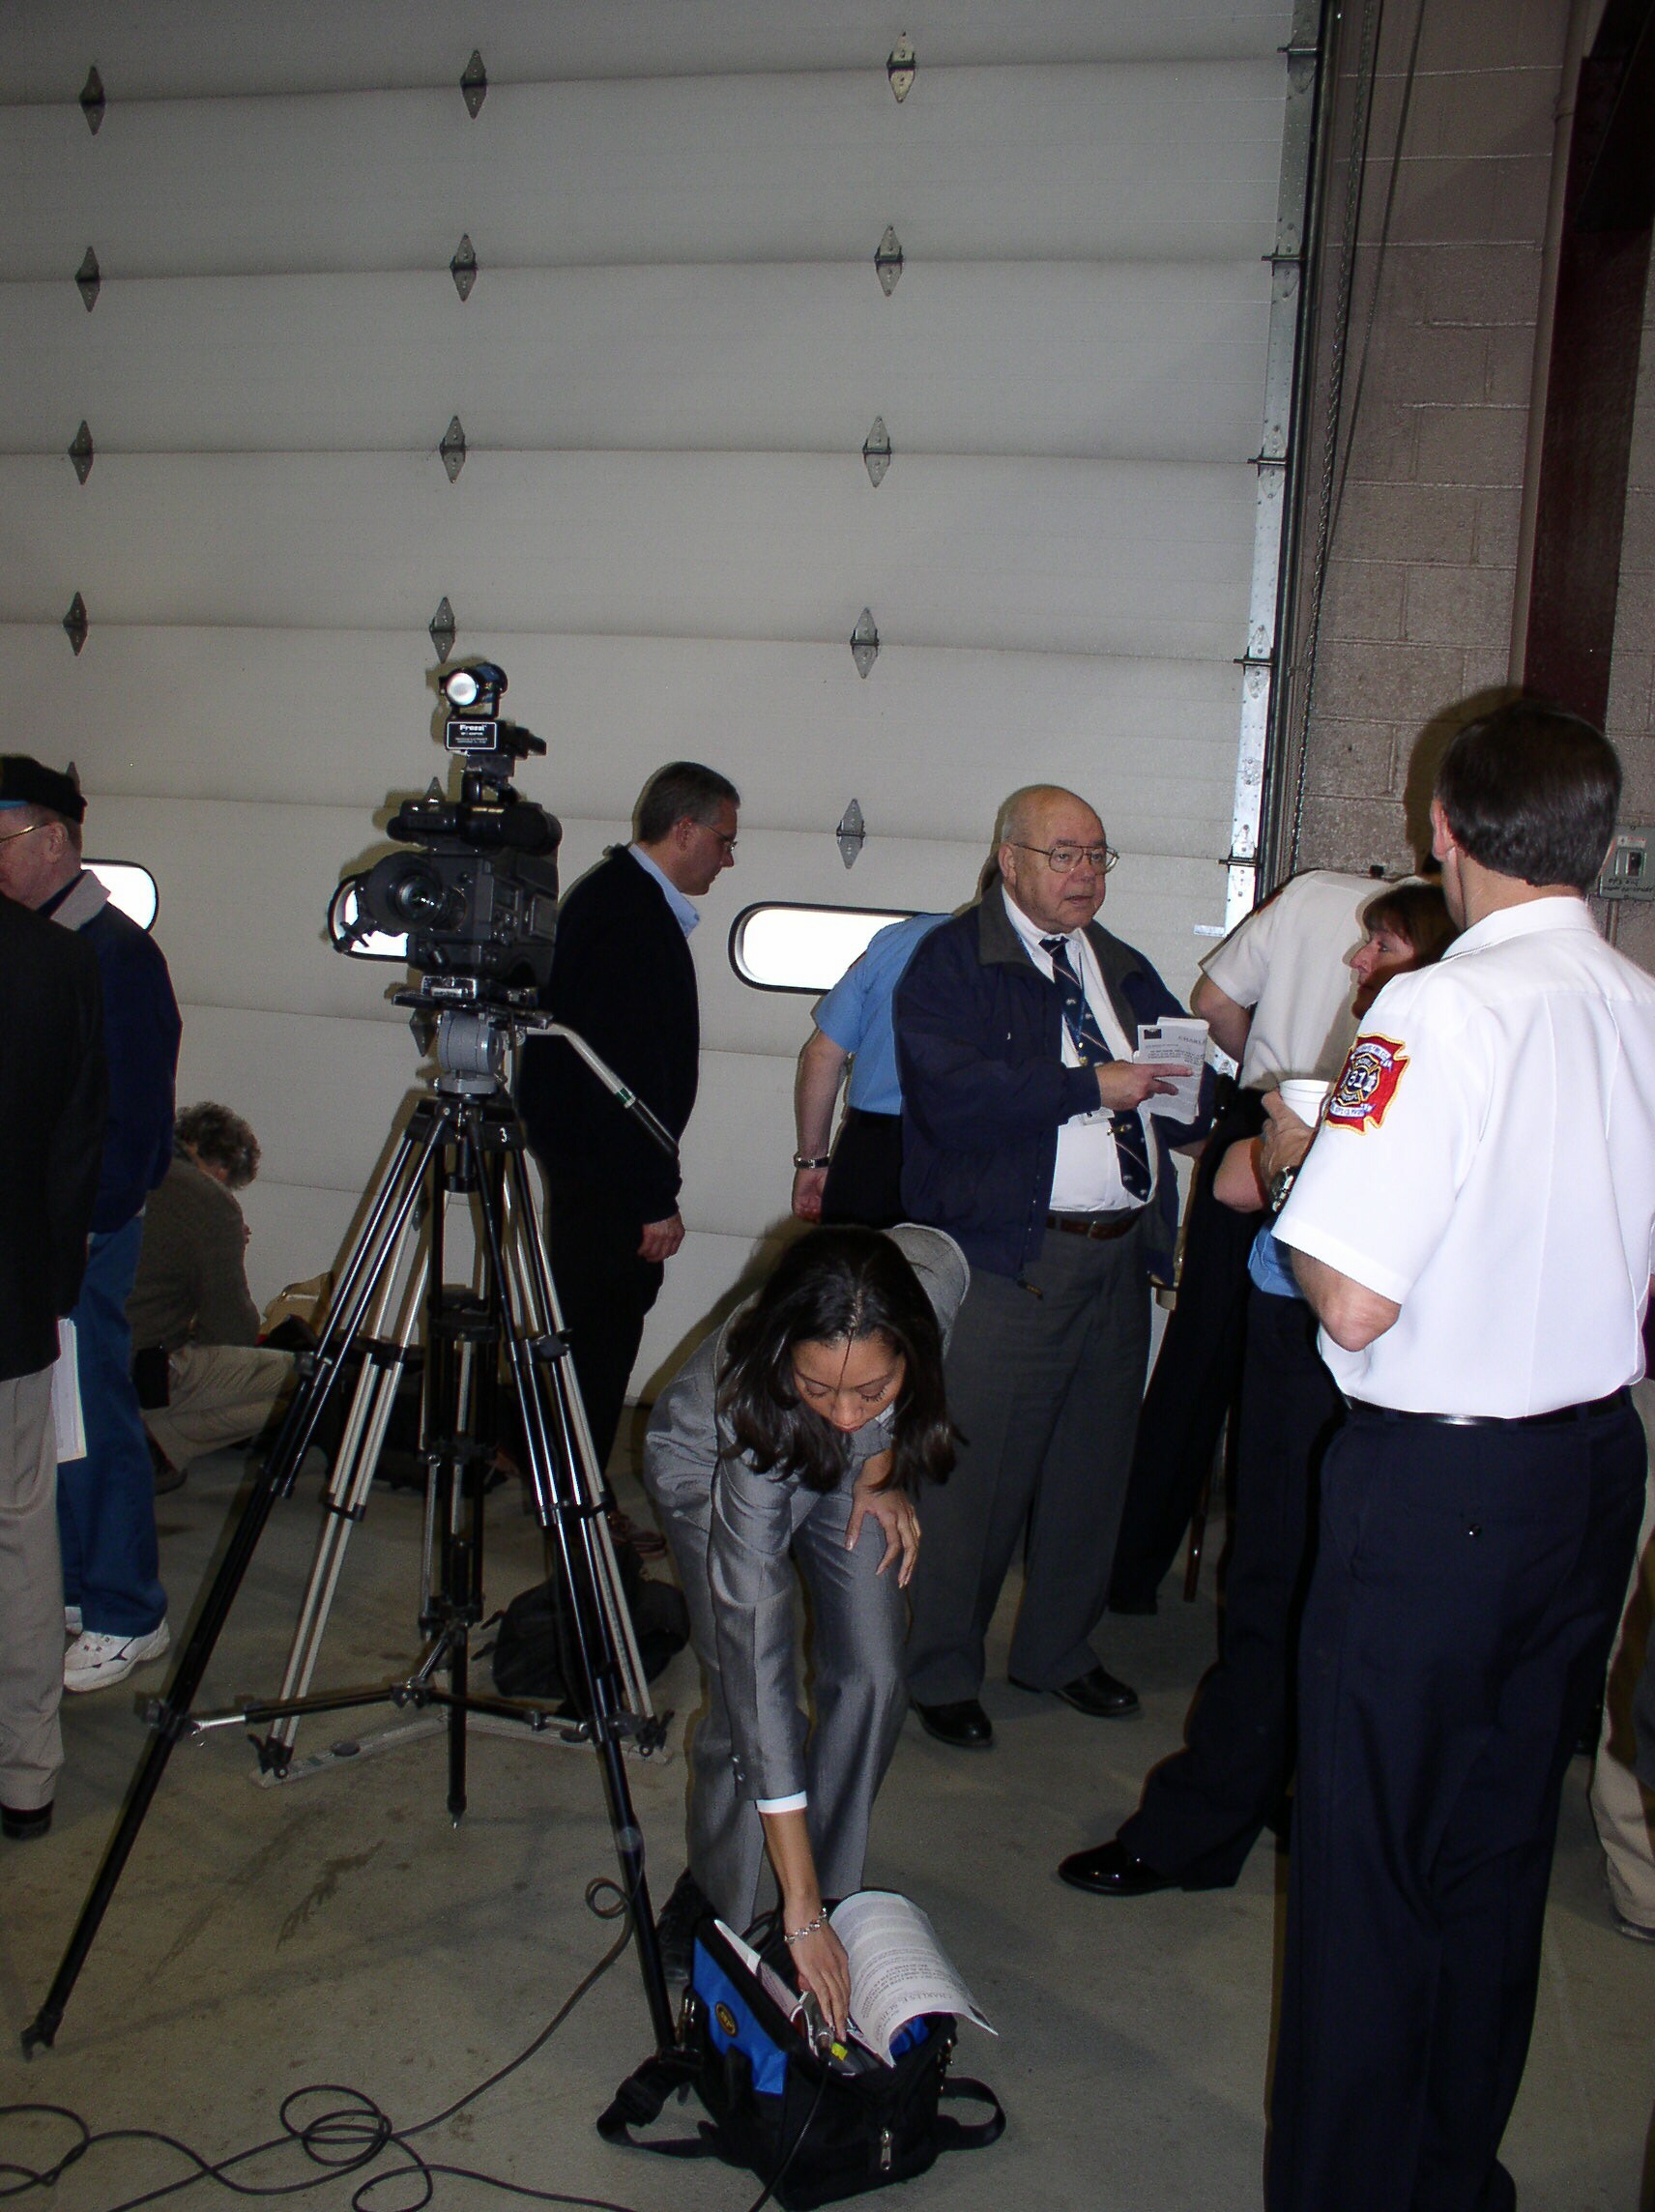 03-23-05  Other - Media Event At Endwell Fire